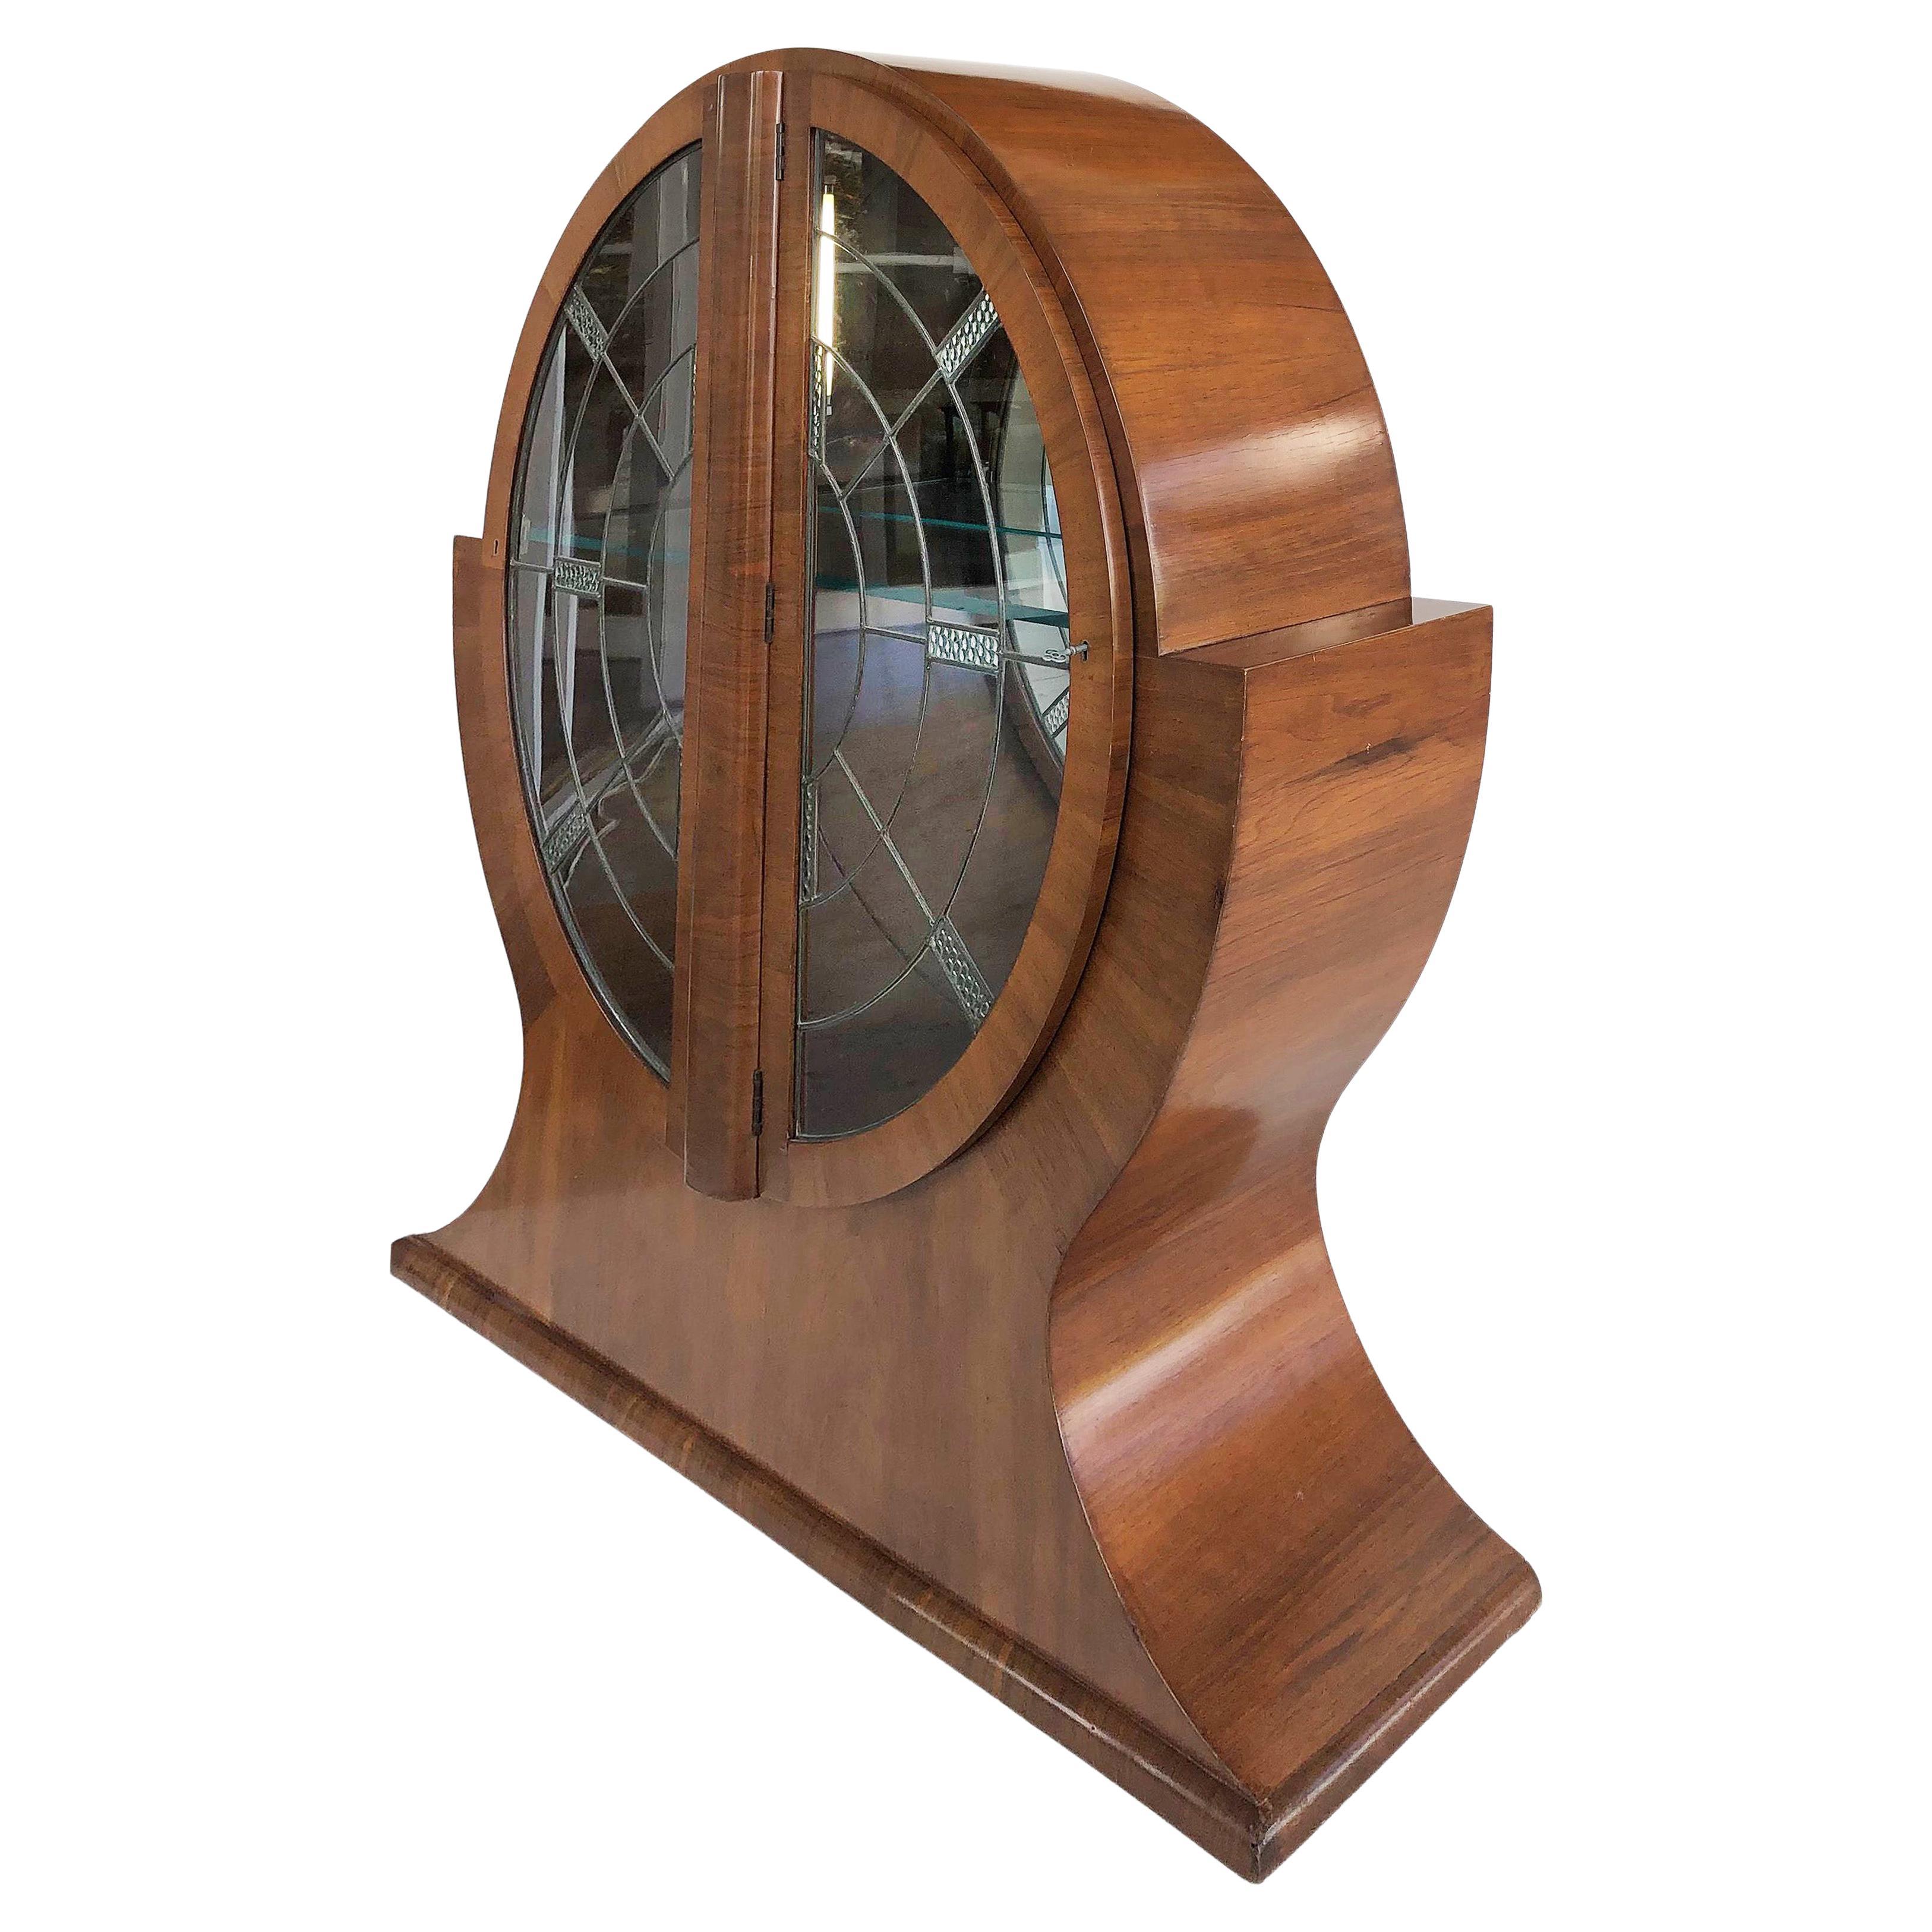 English Art Deco walnut and glass display cabinet vitrine, 1930s

Offered for sale is an Art Deco walnut and glass circular display cabinet vitrine from England dating to the 1930s. This cabinet has two beautifully decorated leaded glass doors